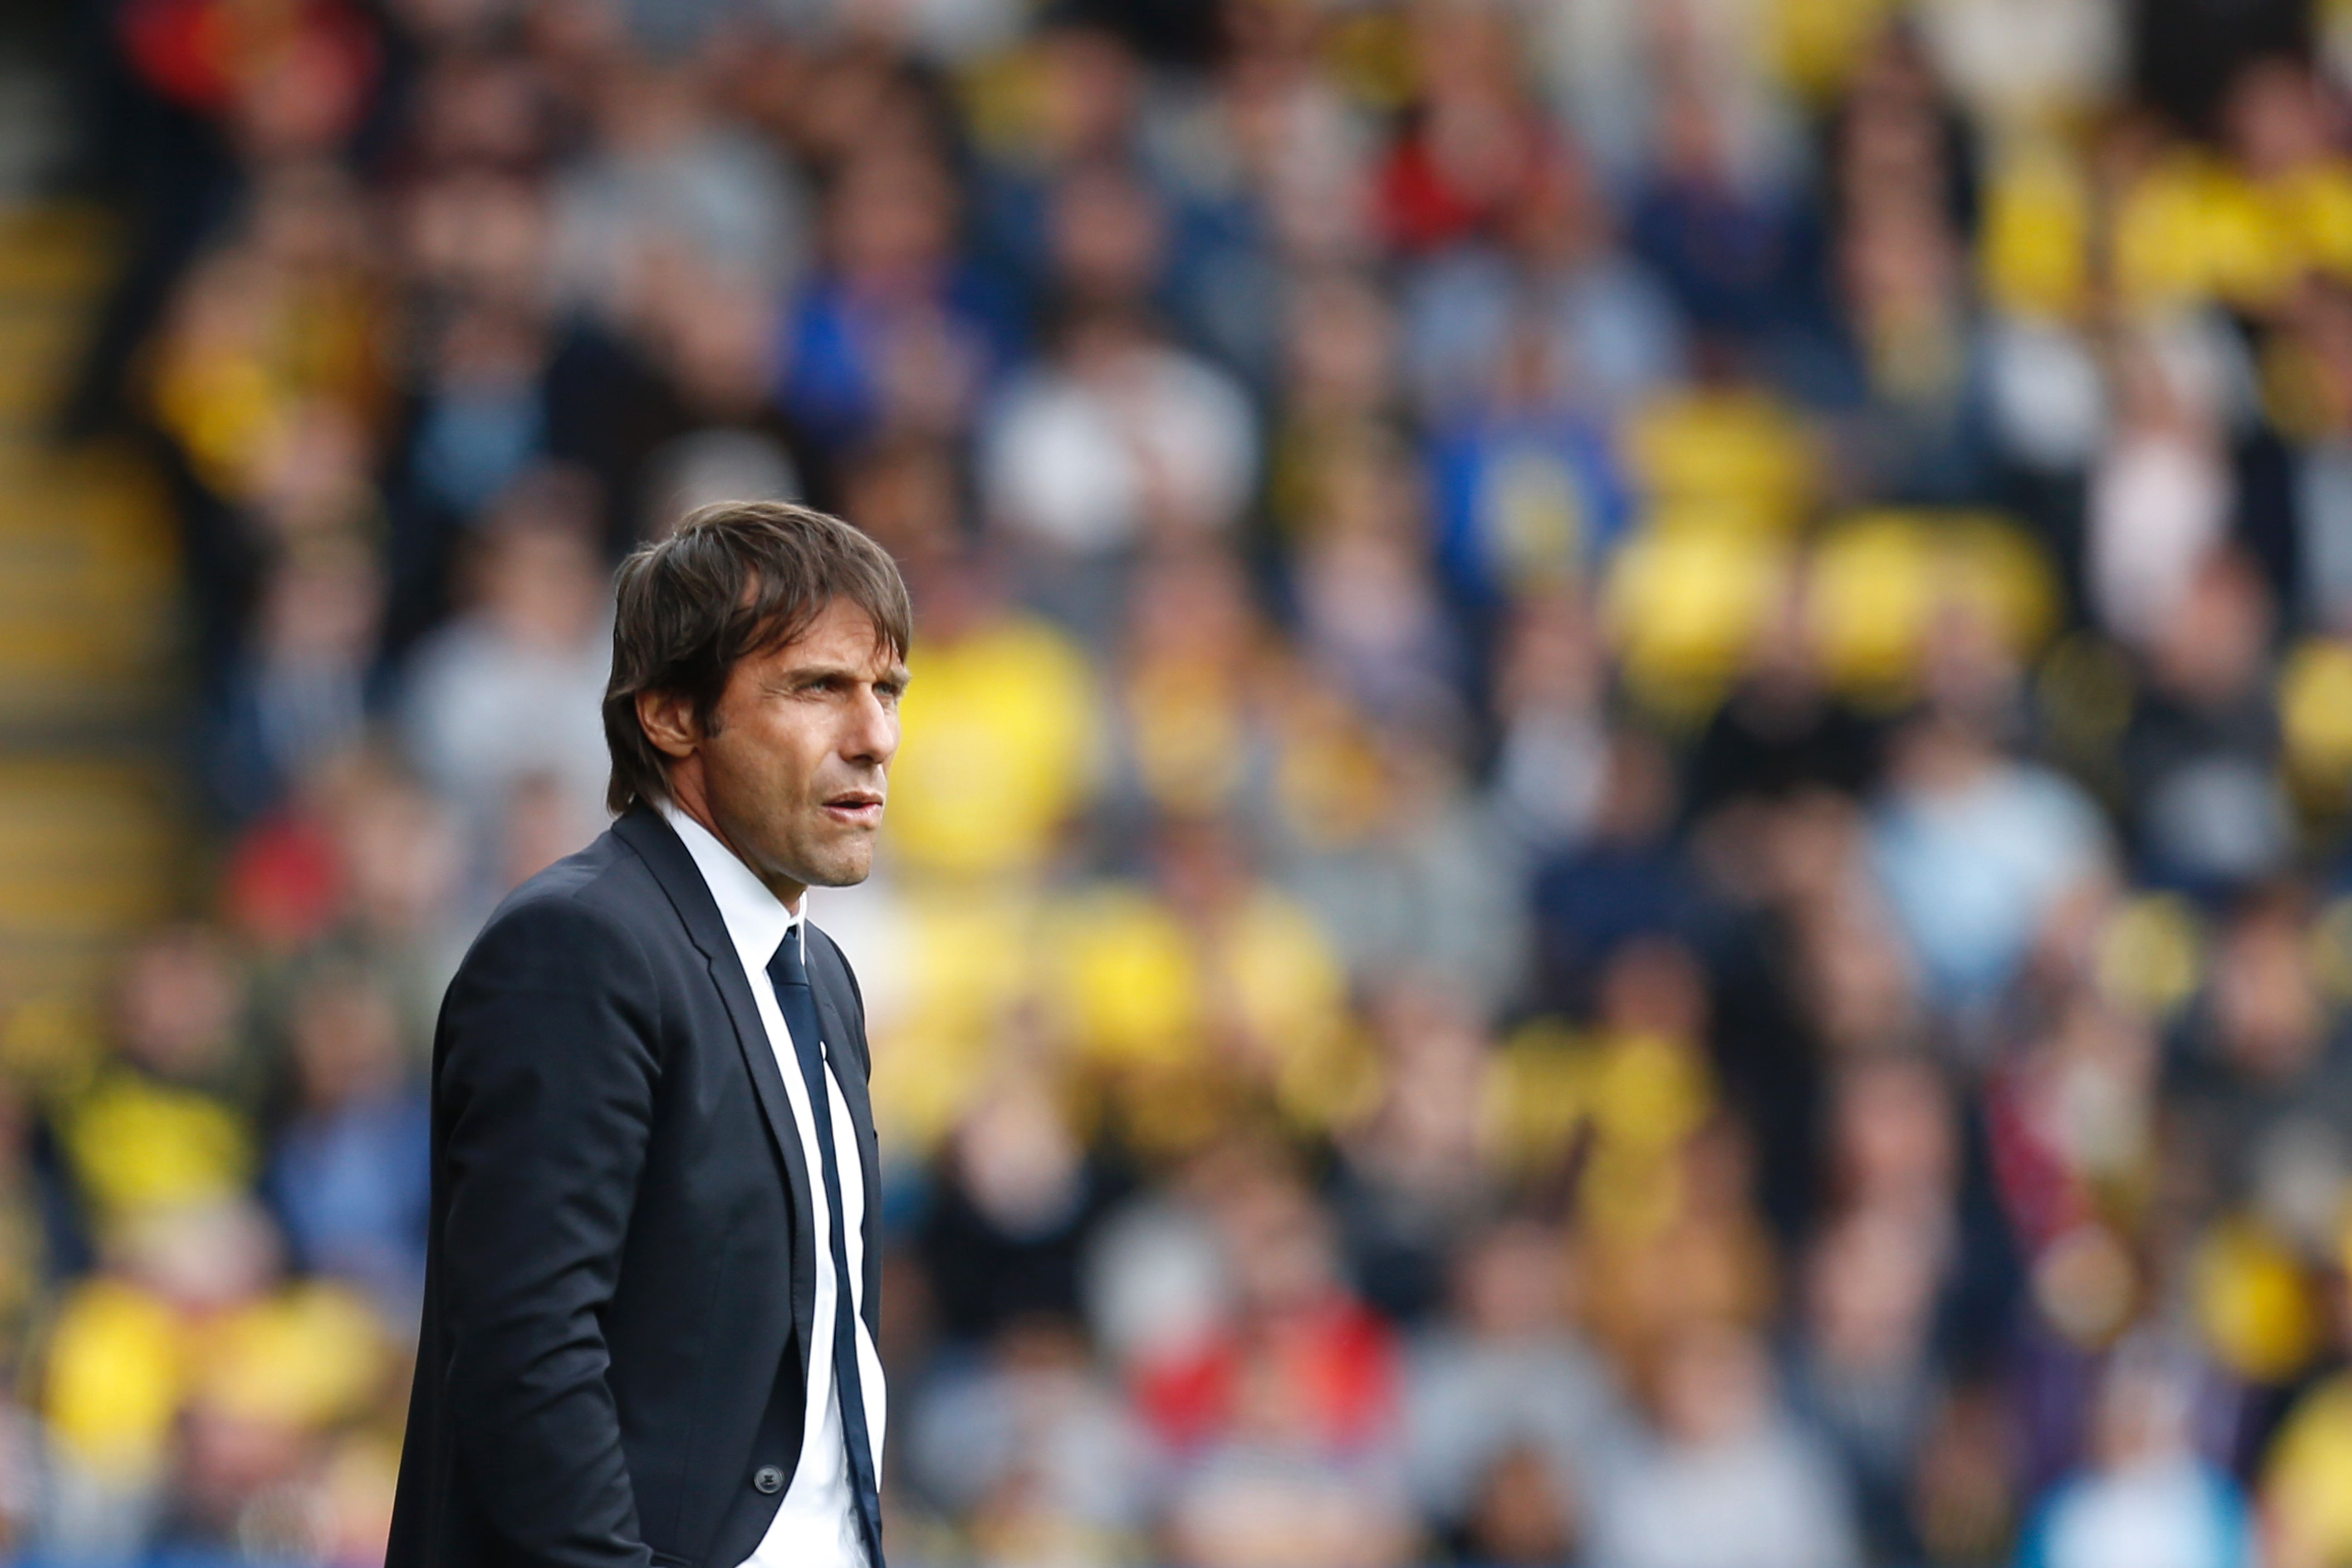 Chelsea's Italian head coach Antonio Conte watches from the touchline during the English Premier League football match between Watford and Chelsea at Vicarage Road Stadium in Watford, north of London on August 20, 2016. / AFP / Ian Kington / RESTRICTED TO EDITORIAL USE. No use with unauthorized audio, video, data, fixture lists, club/league logos or 'live' services. Online in-match use limited to 75 images, no video emulation. No use in betting, games or single club/league/player publications.  /         (Photo credit should read IAN KINGTON/AFP/Getty Images)